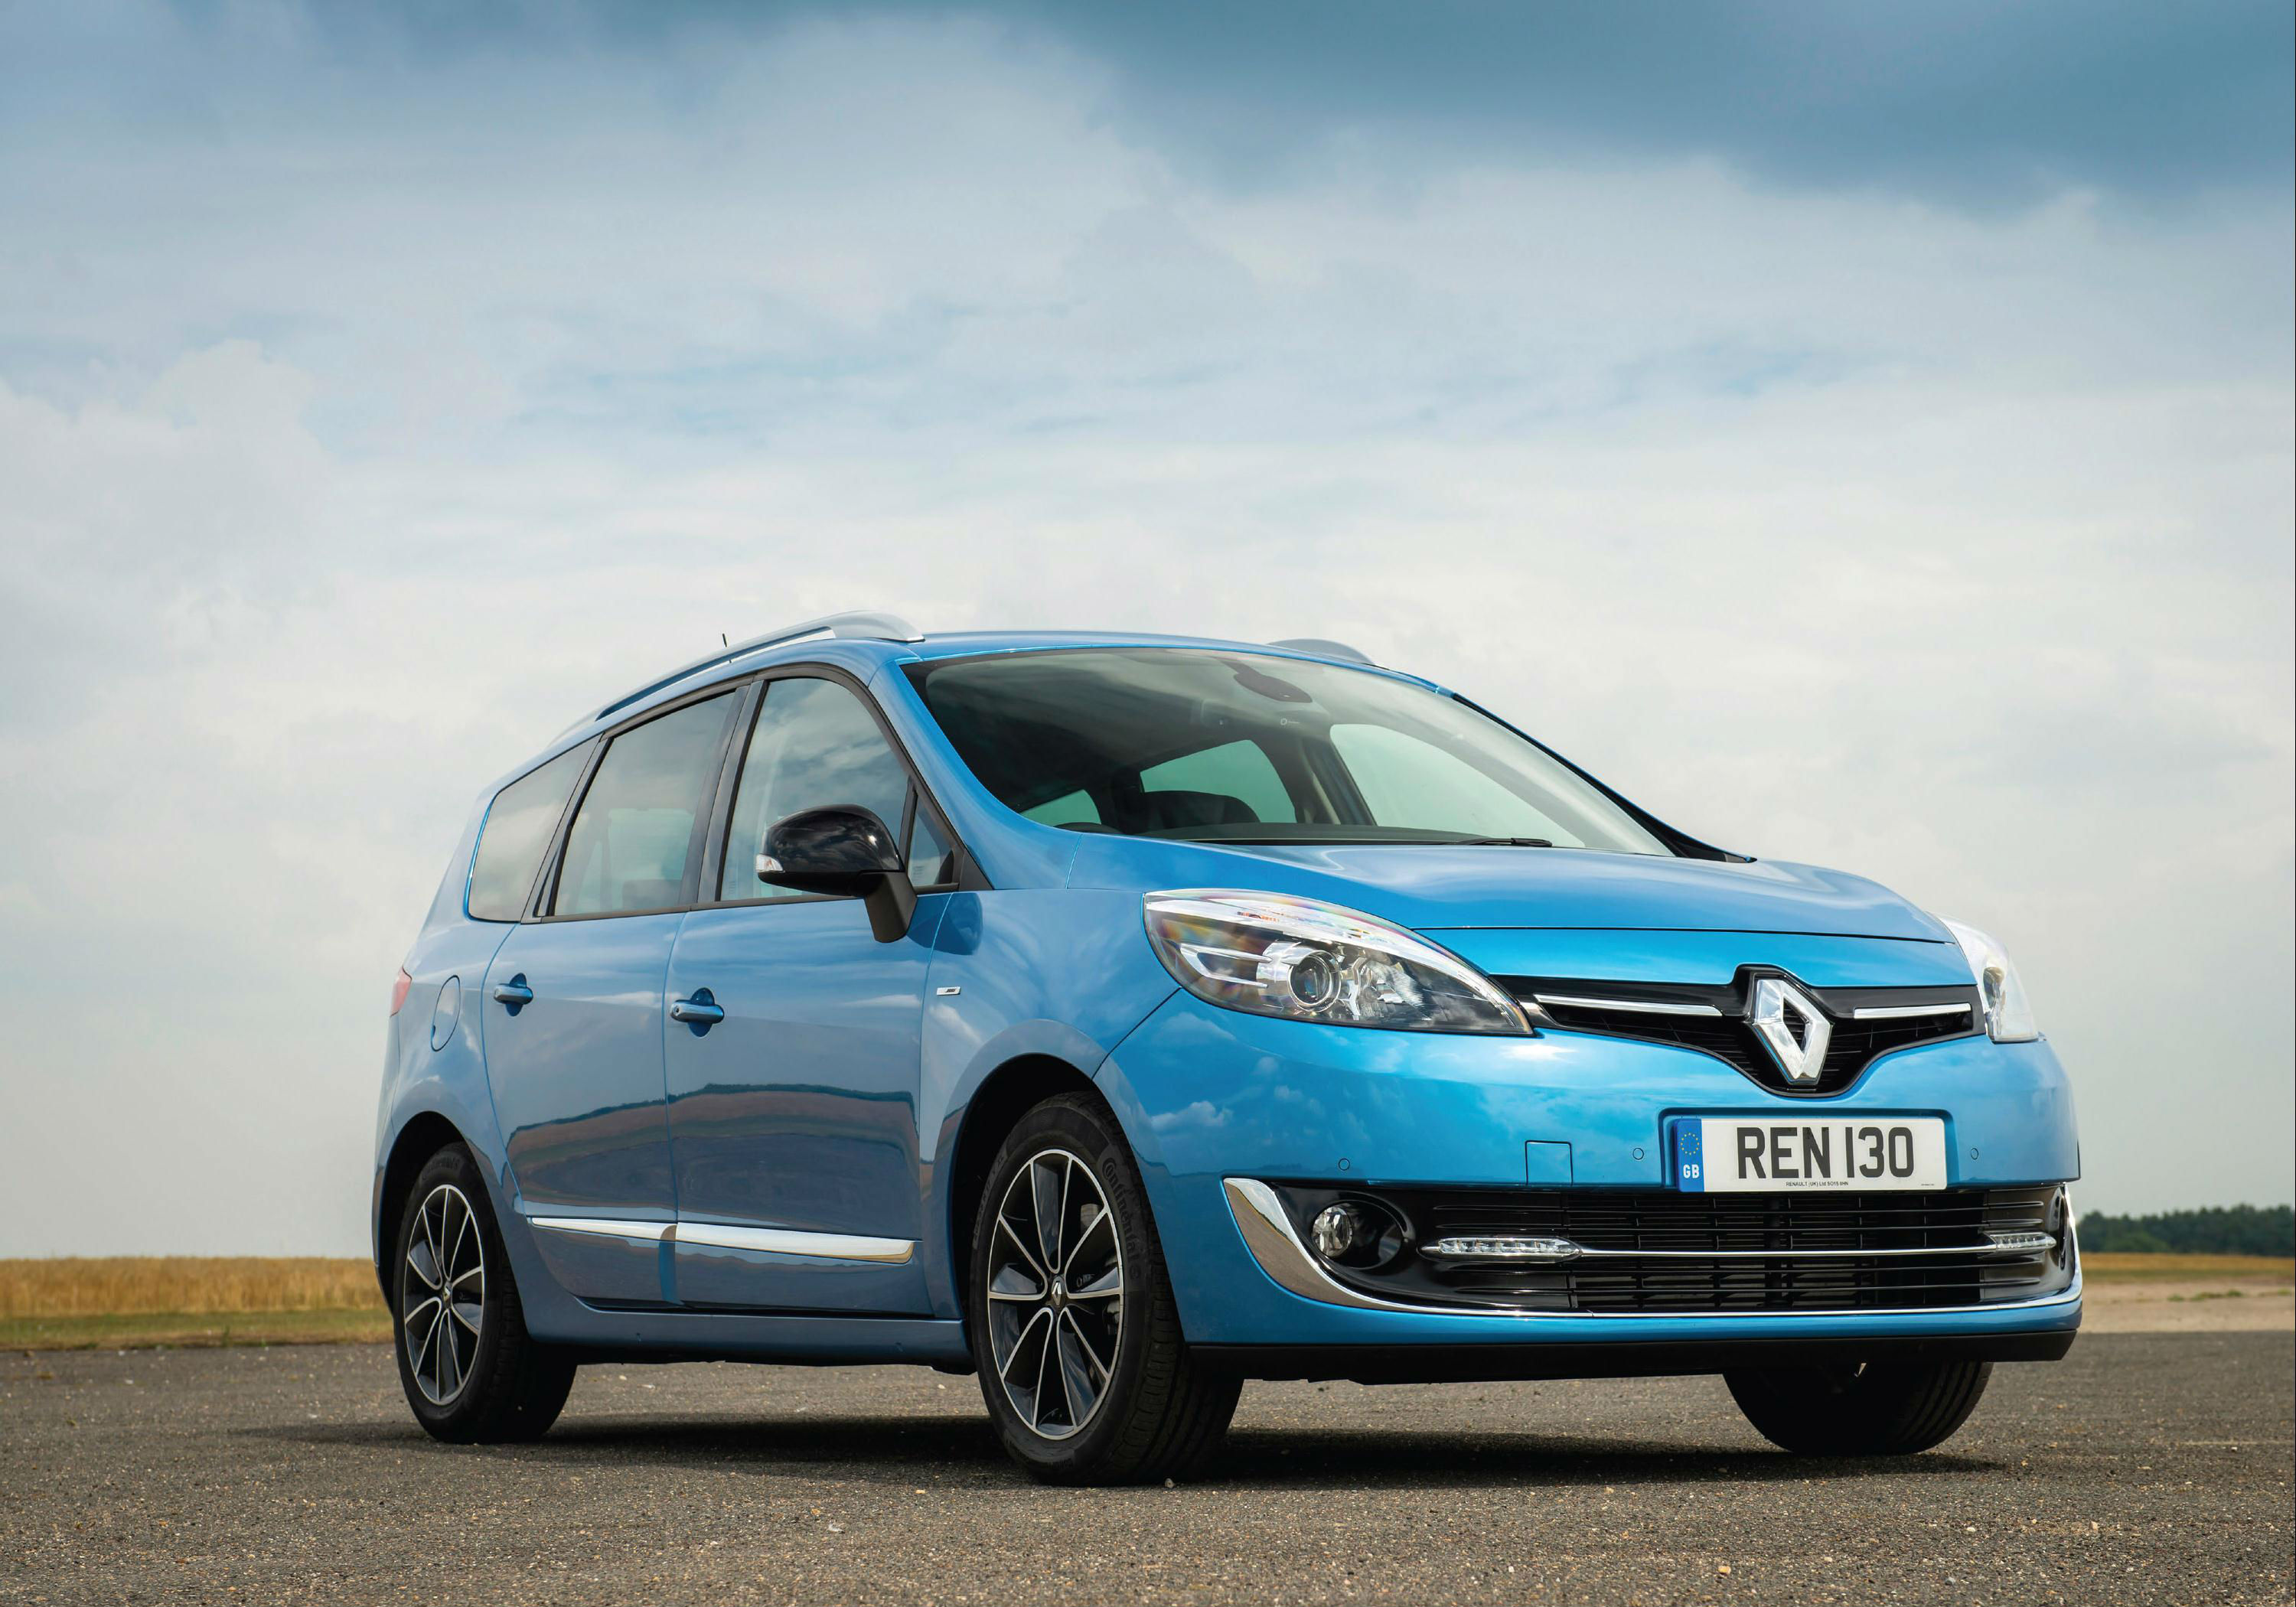 Renault Grand Scenic has a 702-litre boot